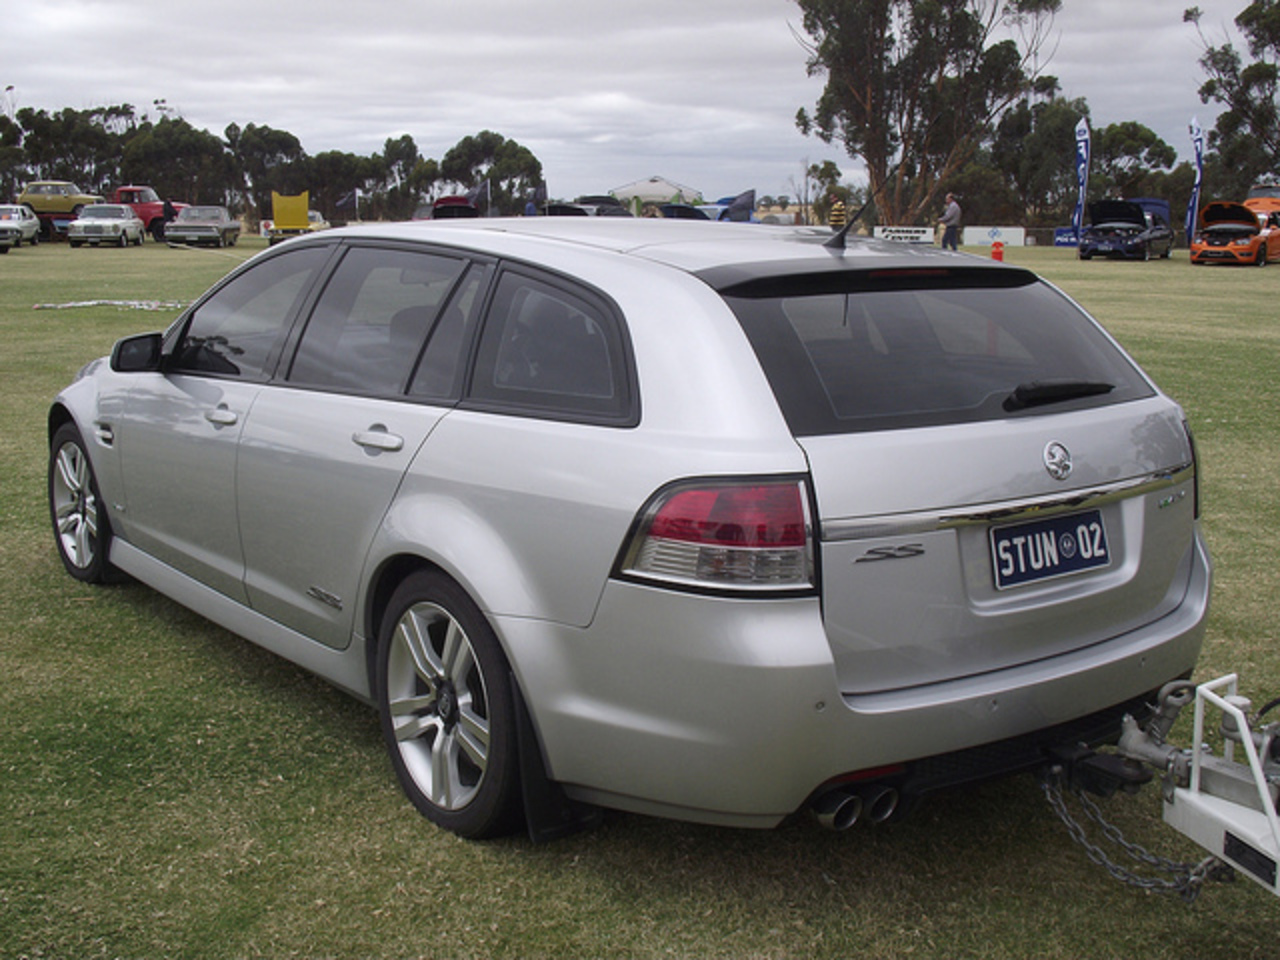 2011 Holden VE Commodore SS Wagon | Flickr - Photo Sharing!